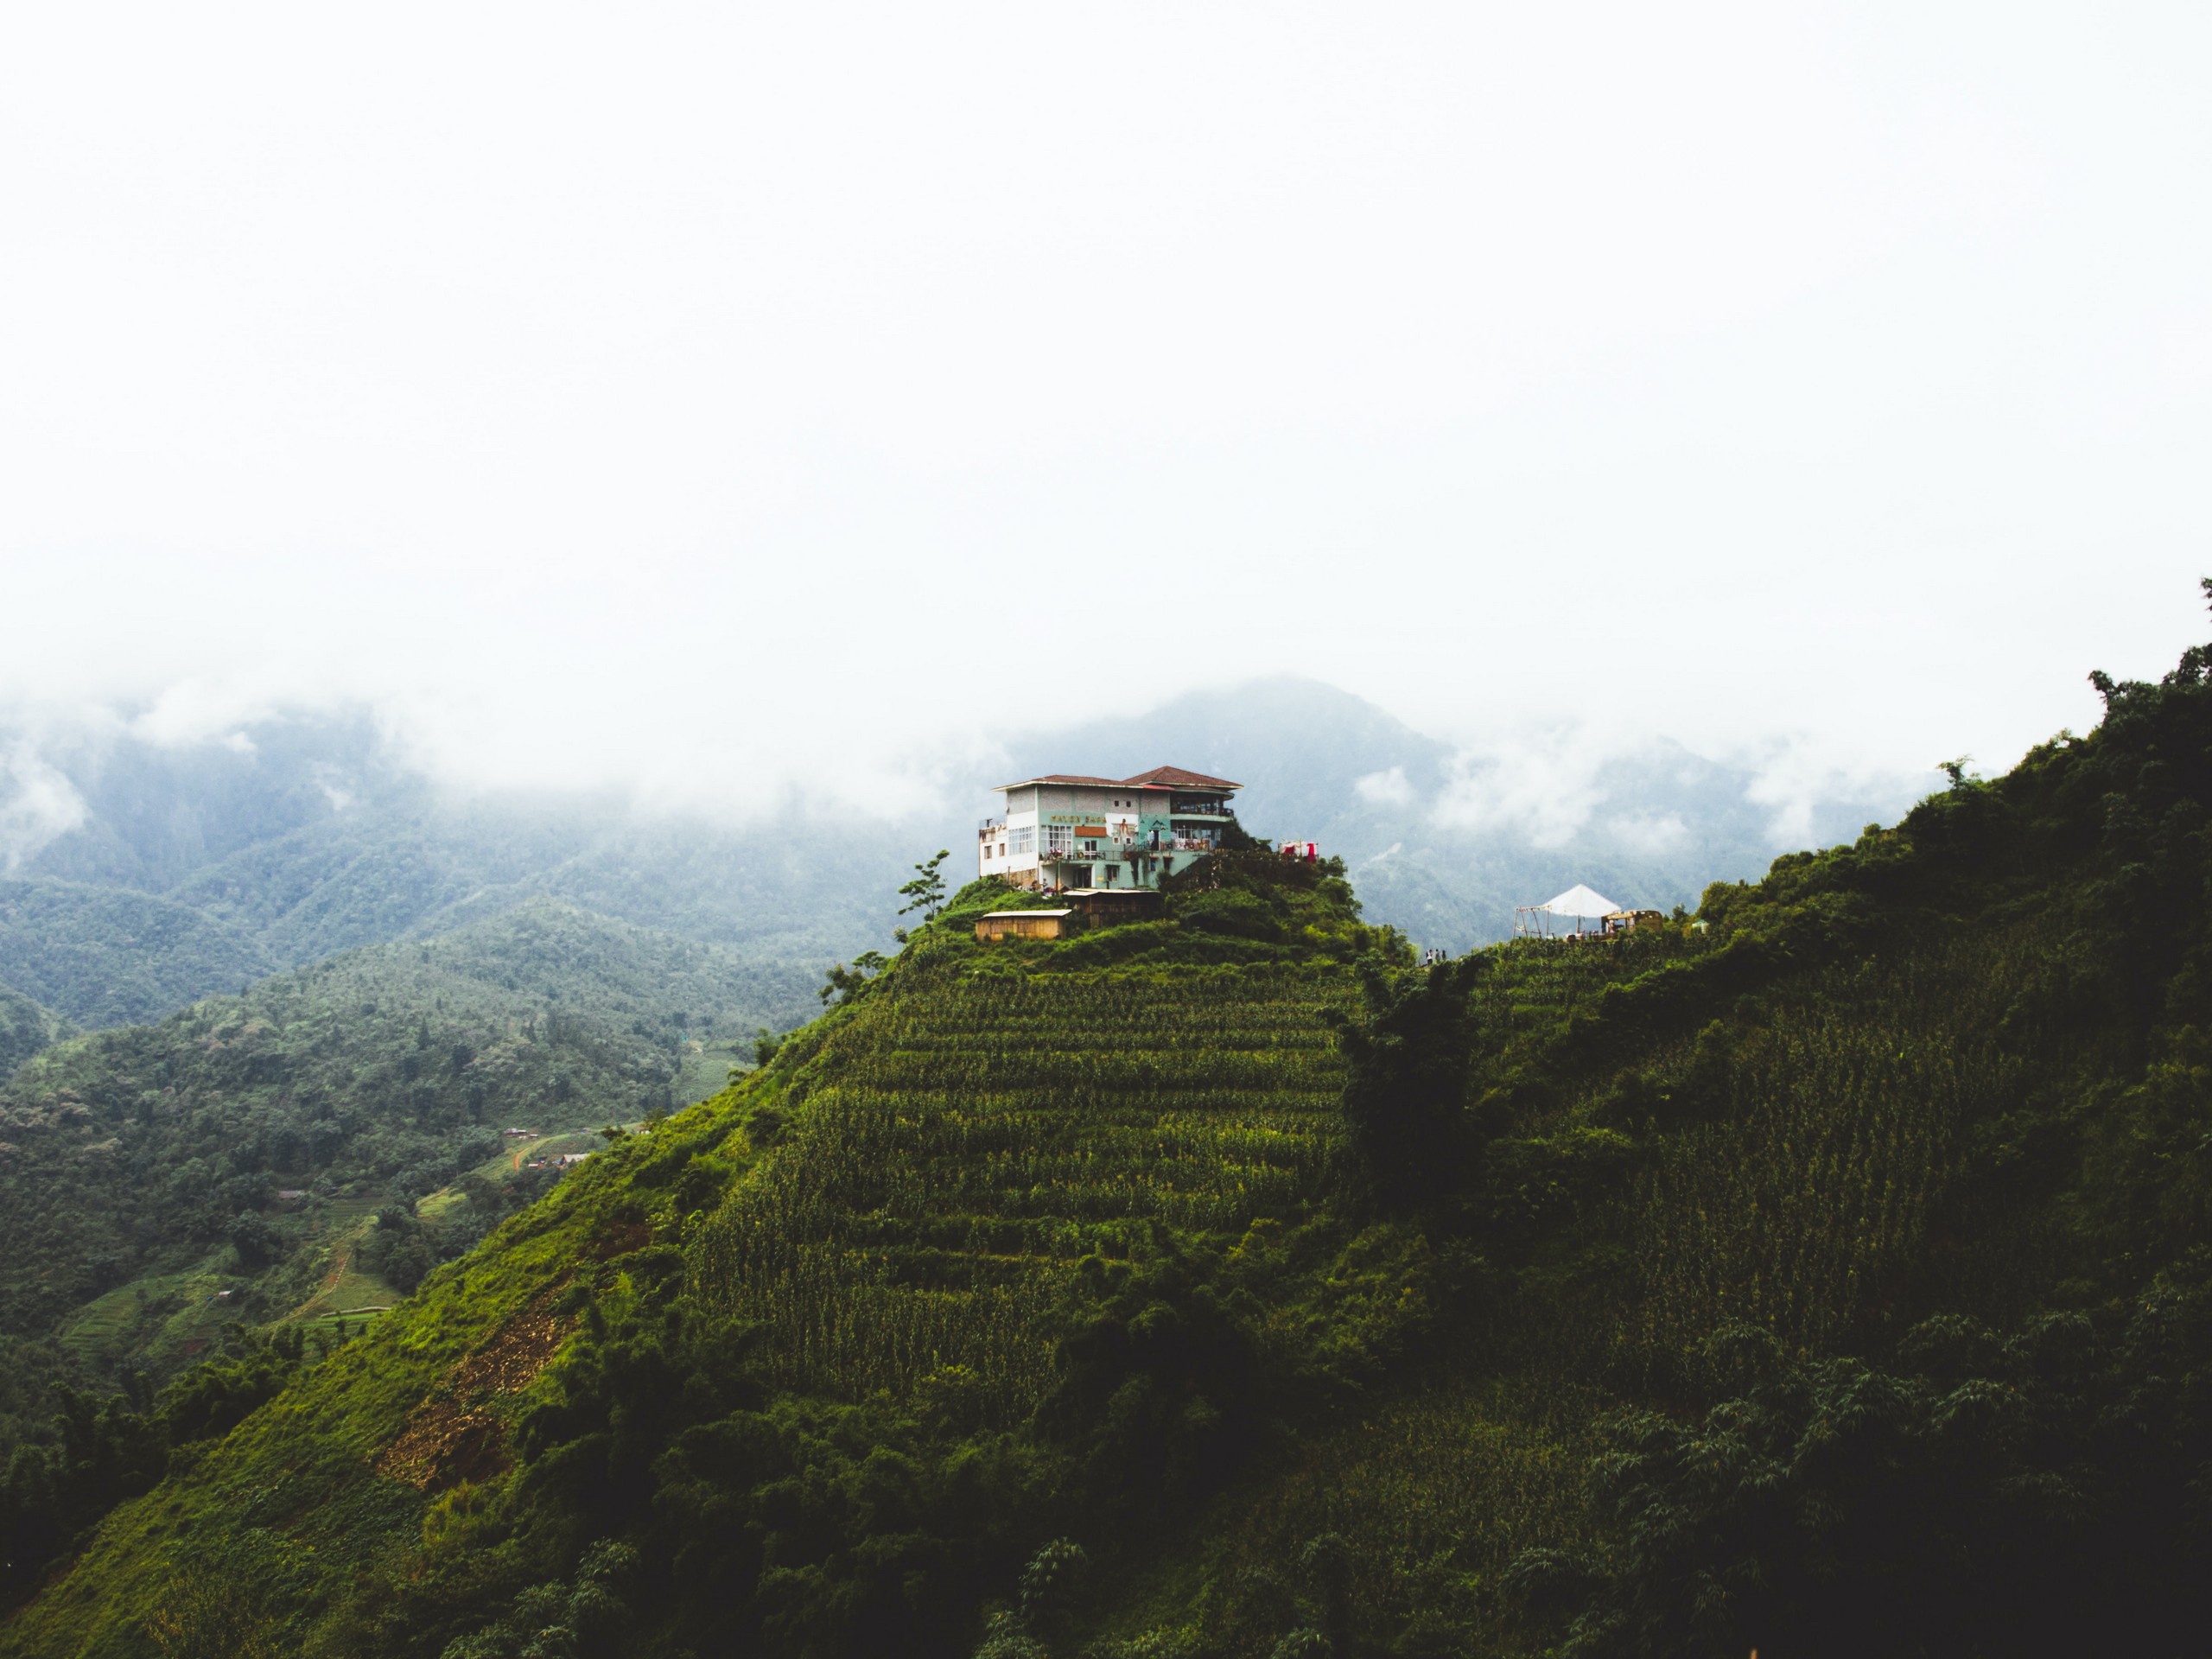 House above the clouds in Sapa Valley, Vietnam